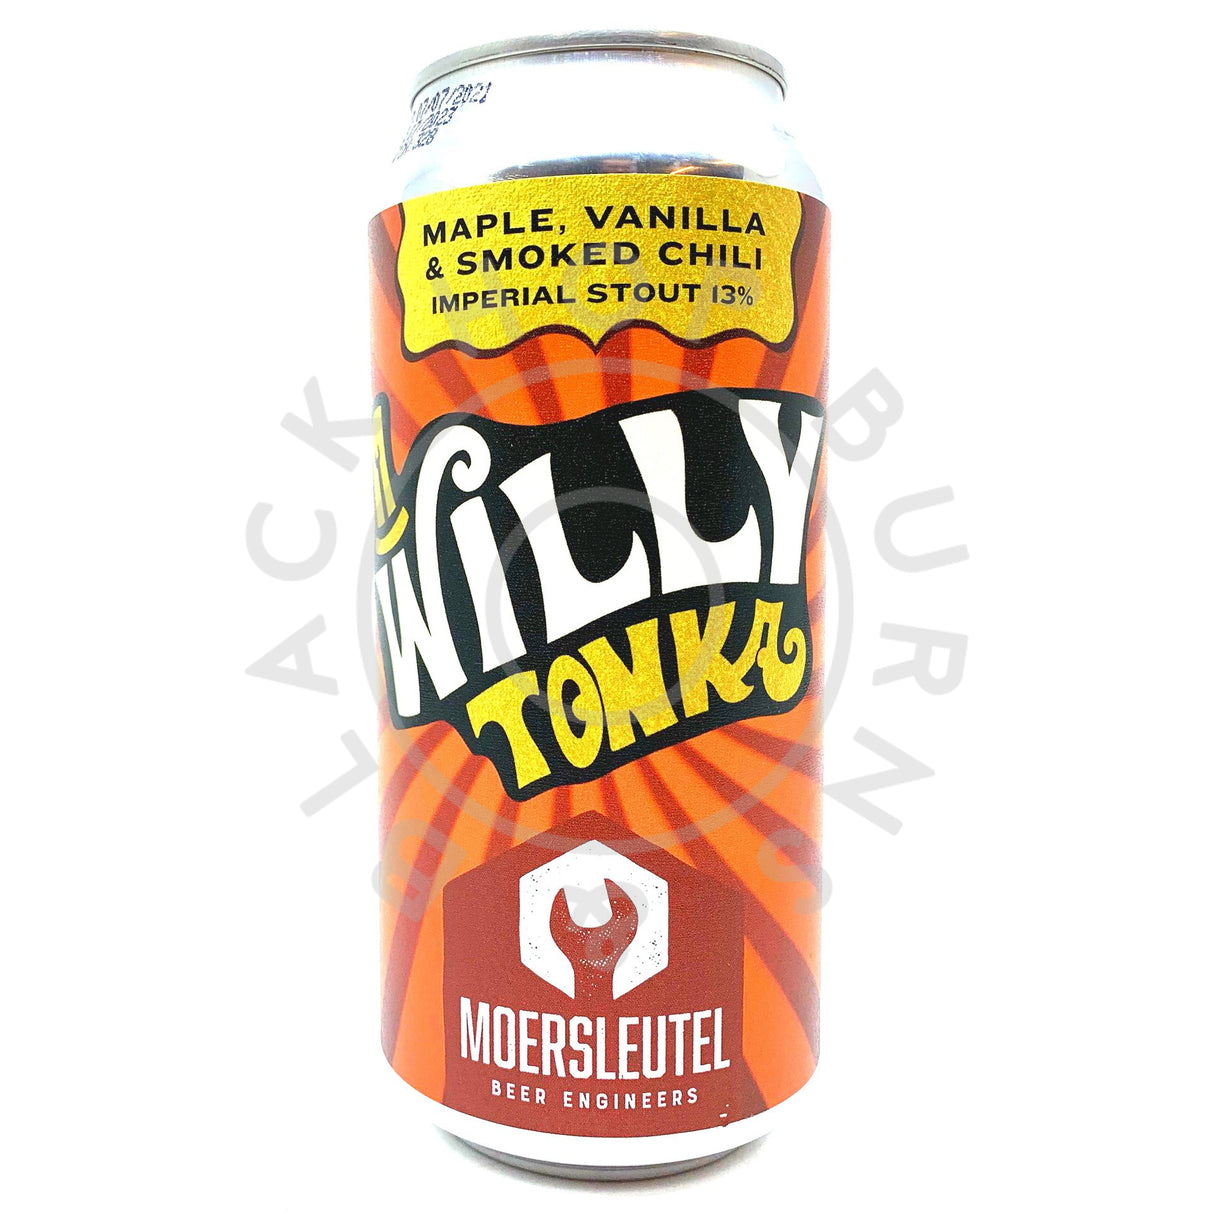 De Moersleutel Willy Tonka - Maple, Vanilla and Smoked Chili Imperial Stout 13% (440ml can)-Hop Burns & Black